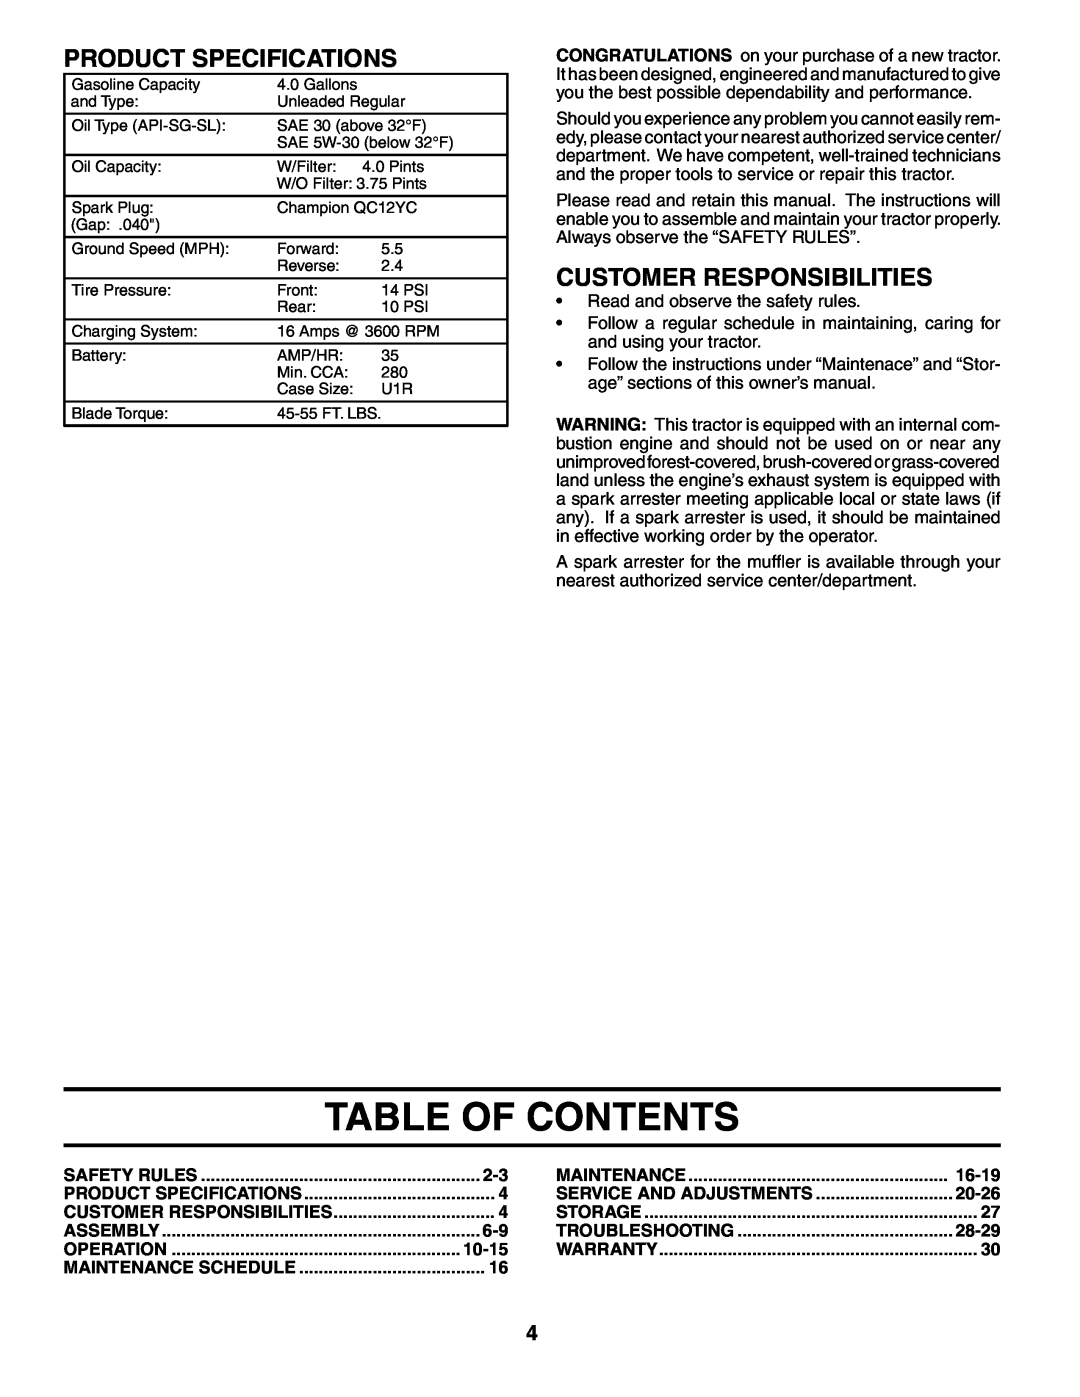 Poulan 195854 manual Table Of Contents, Product Specifications, Customer Responsibilities, 10-15, 16-19, 20-26, 28-29 